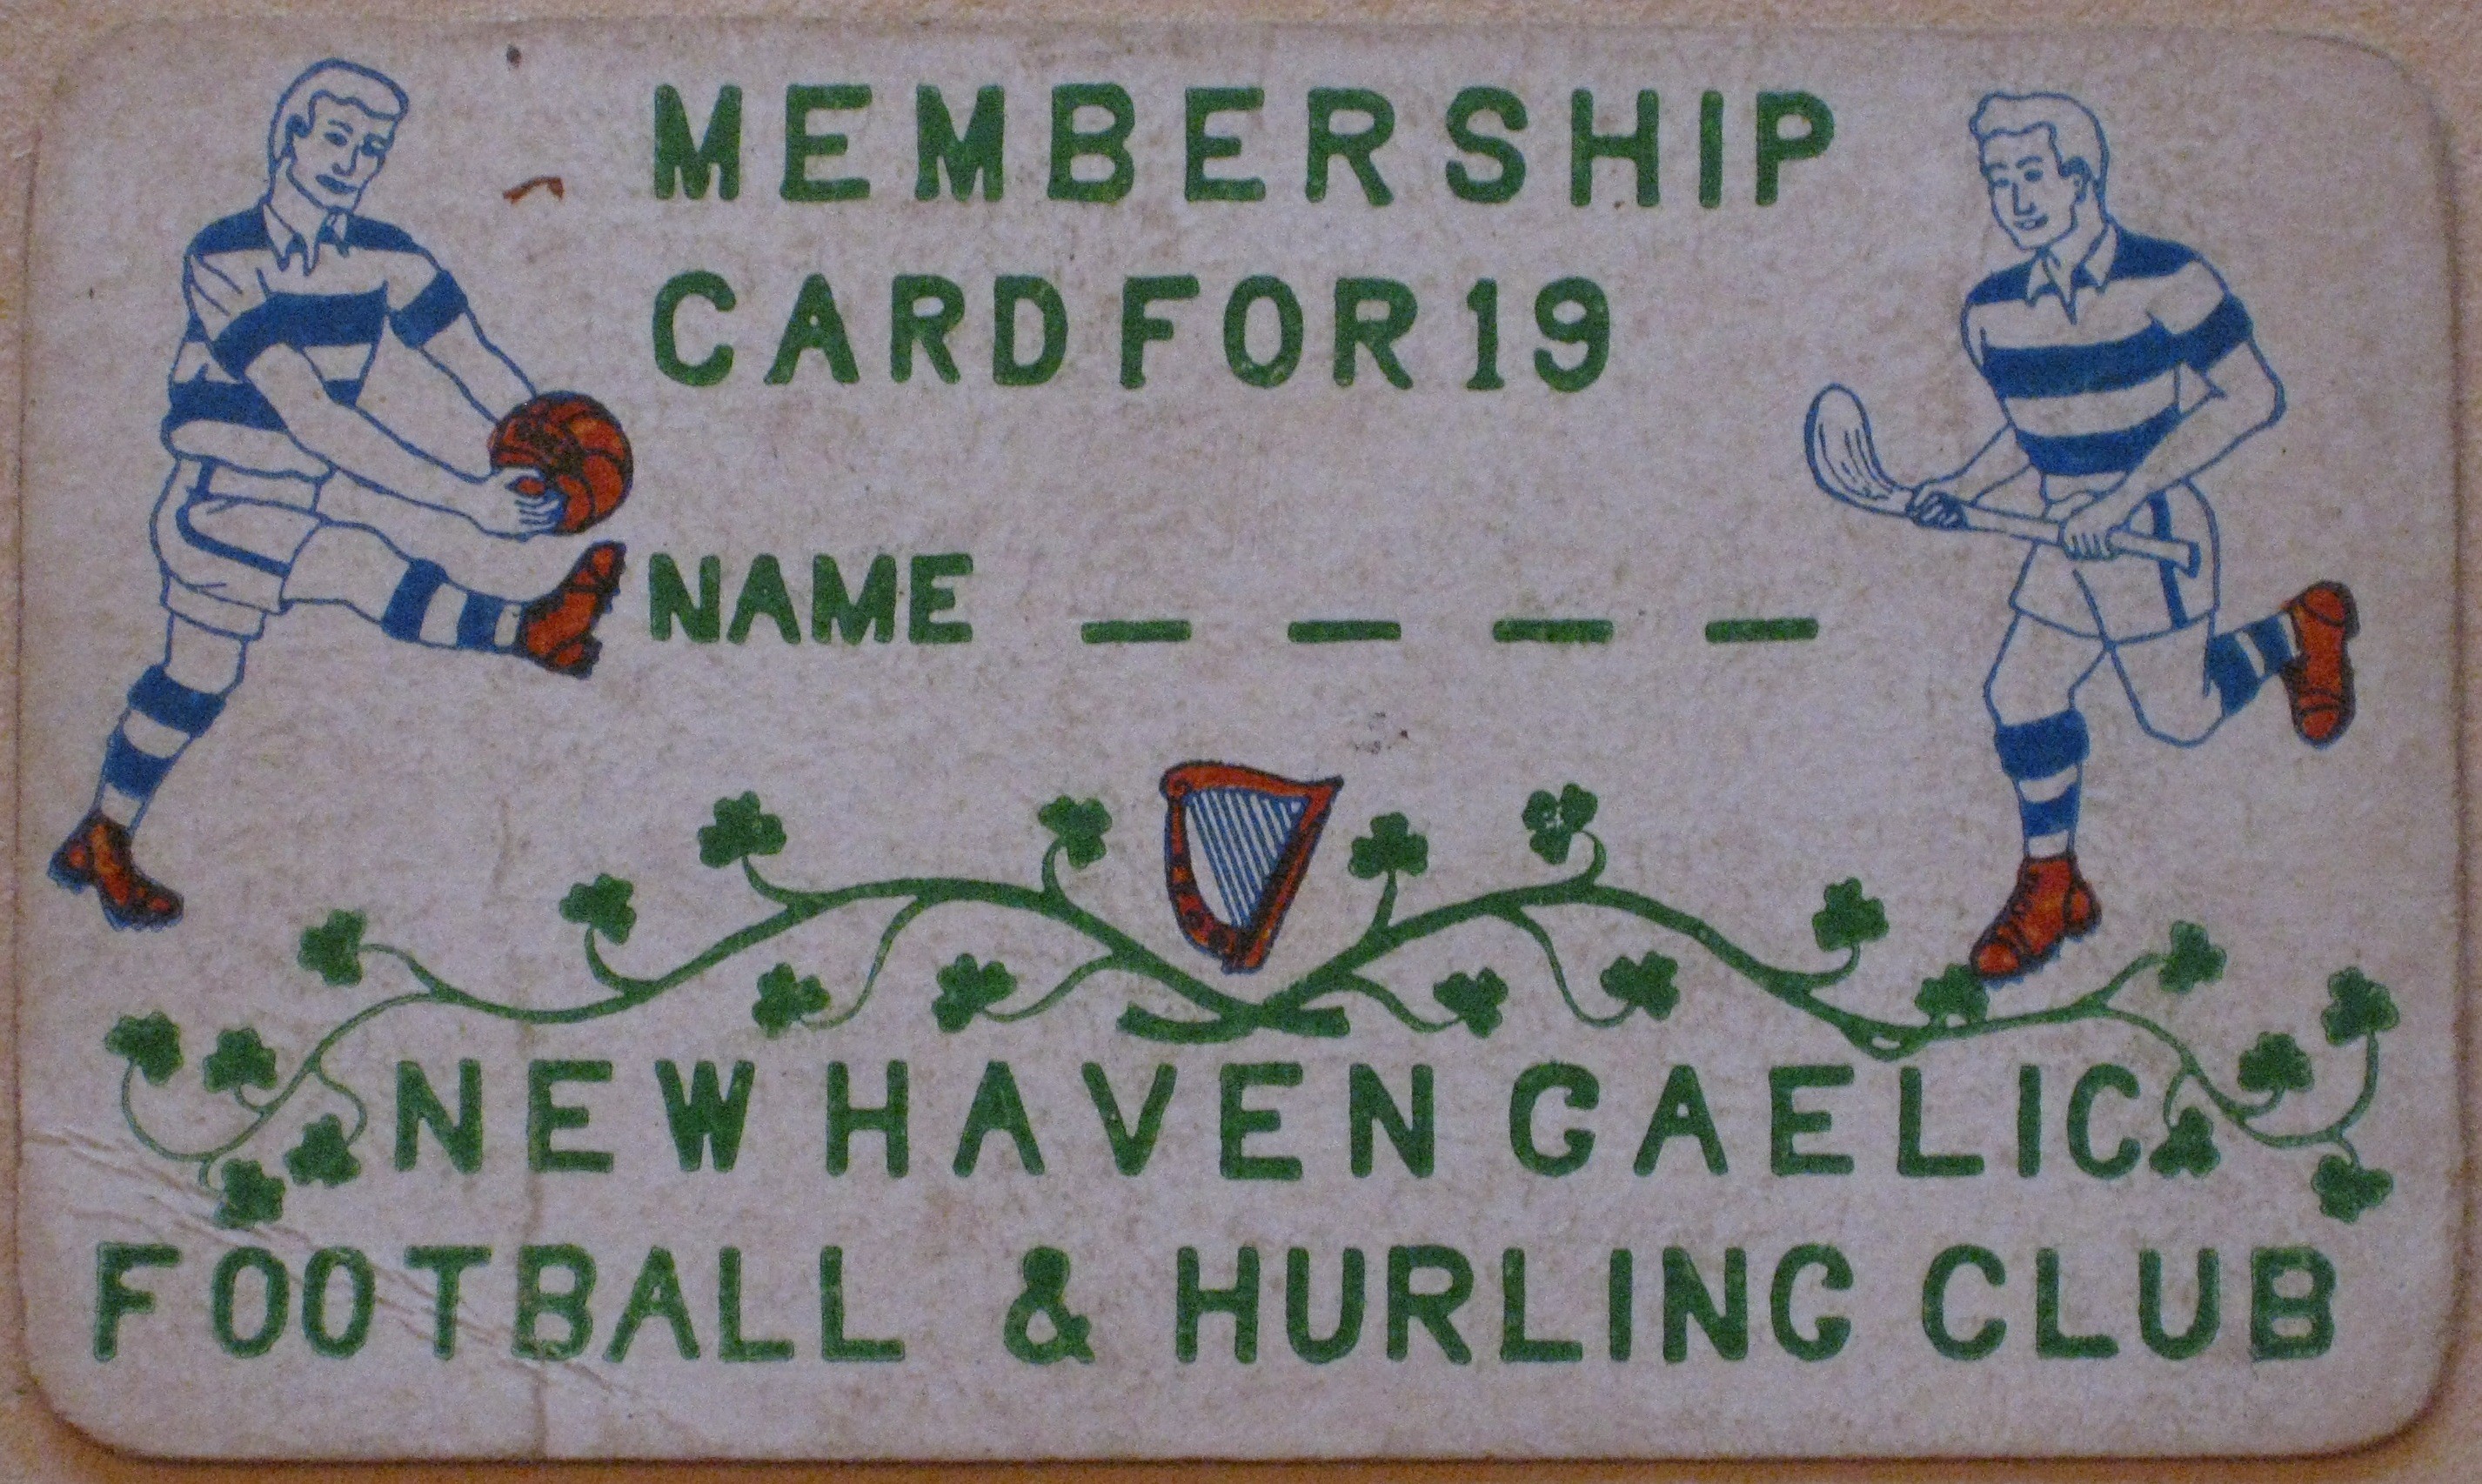 A membership card for New Haven Gaelic Football and Hurling Club, Connecticut.